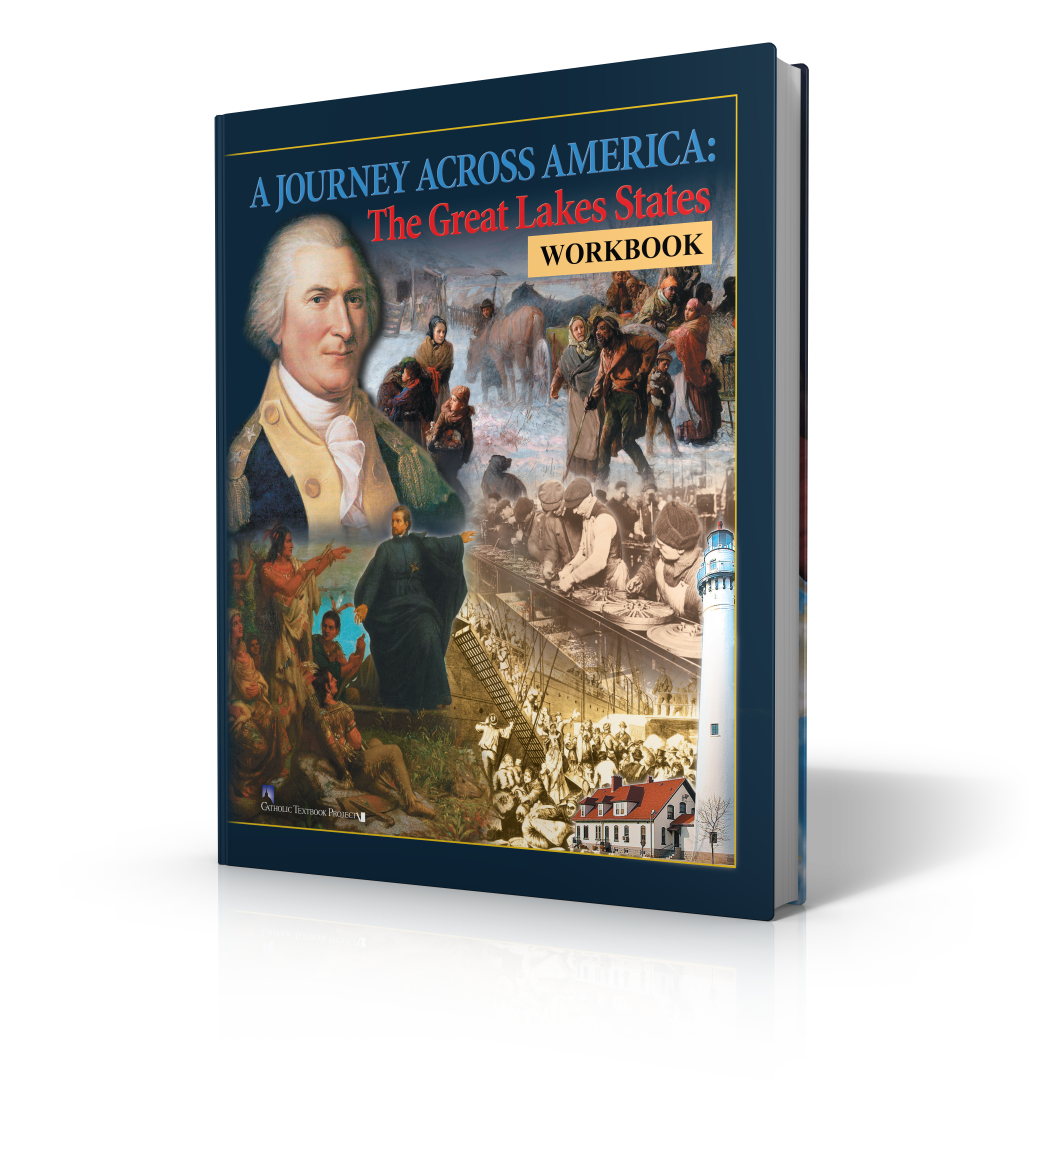 A Journey Across America: The Great Lakes States (Workbook)